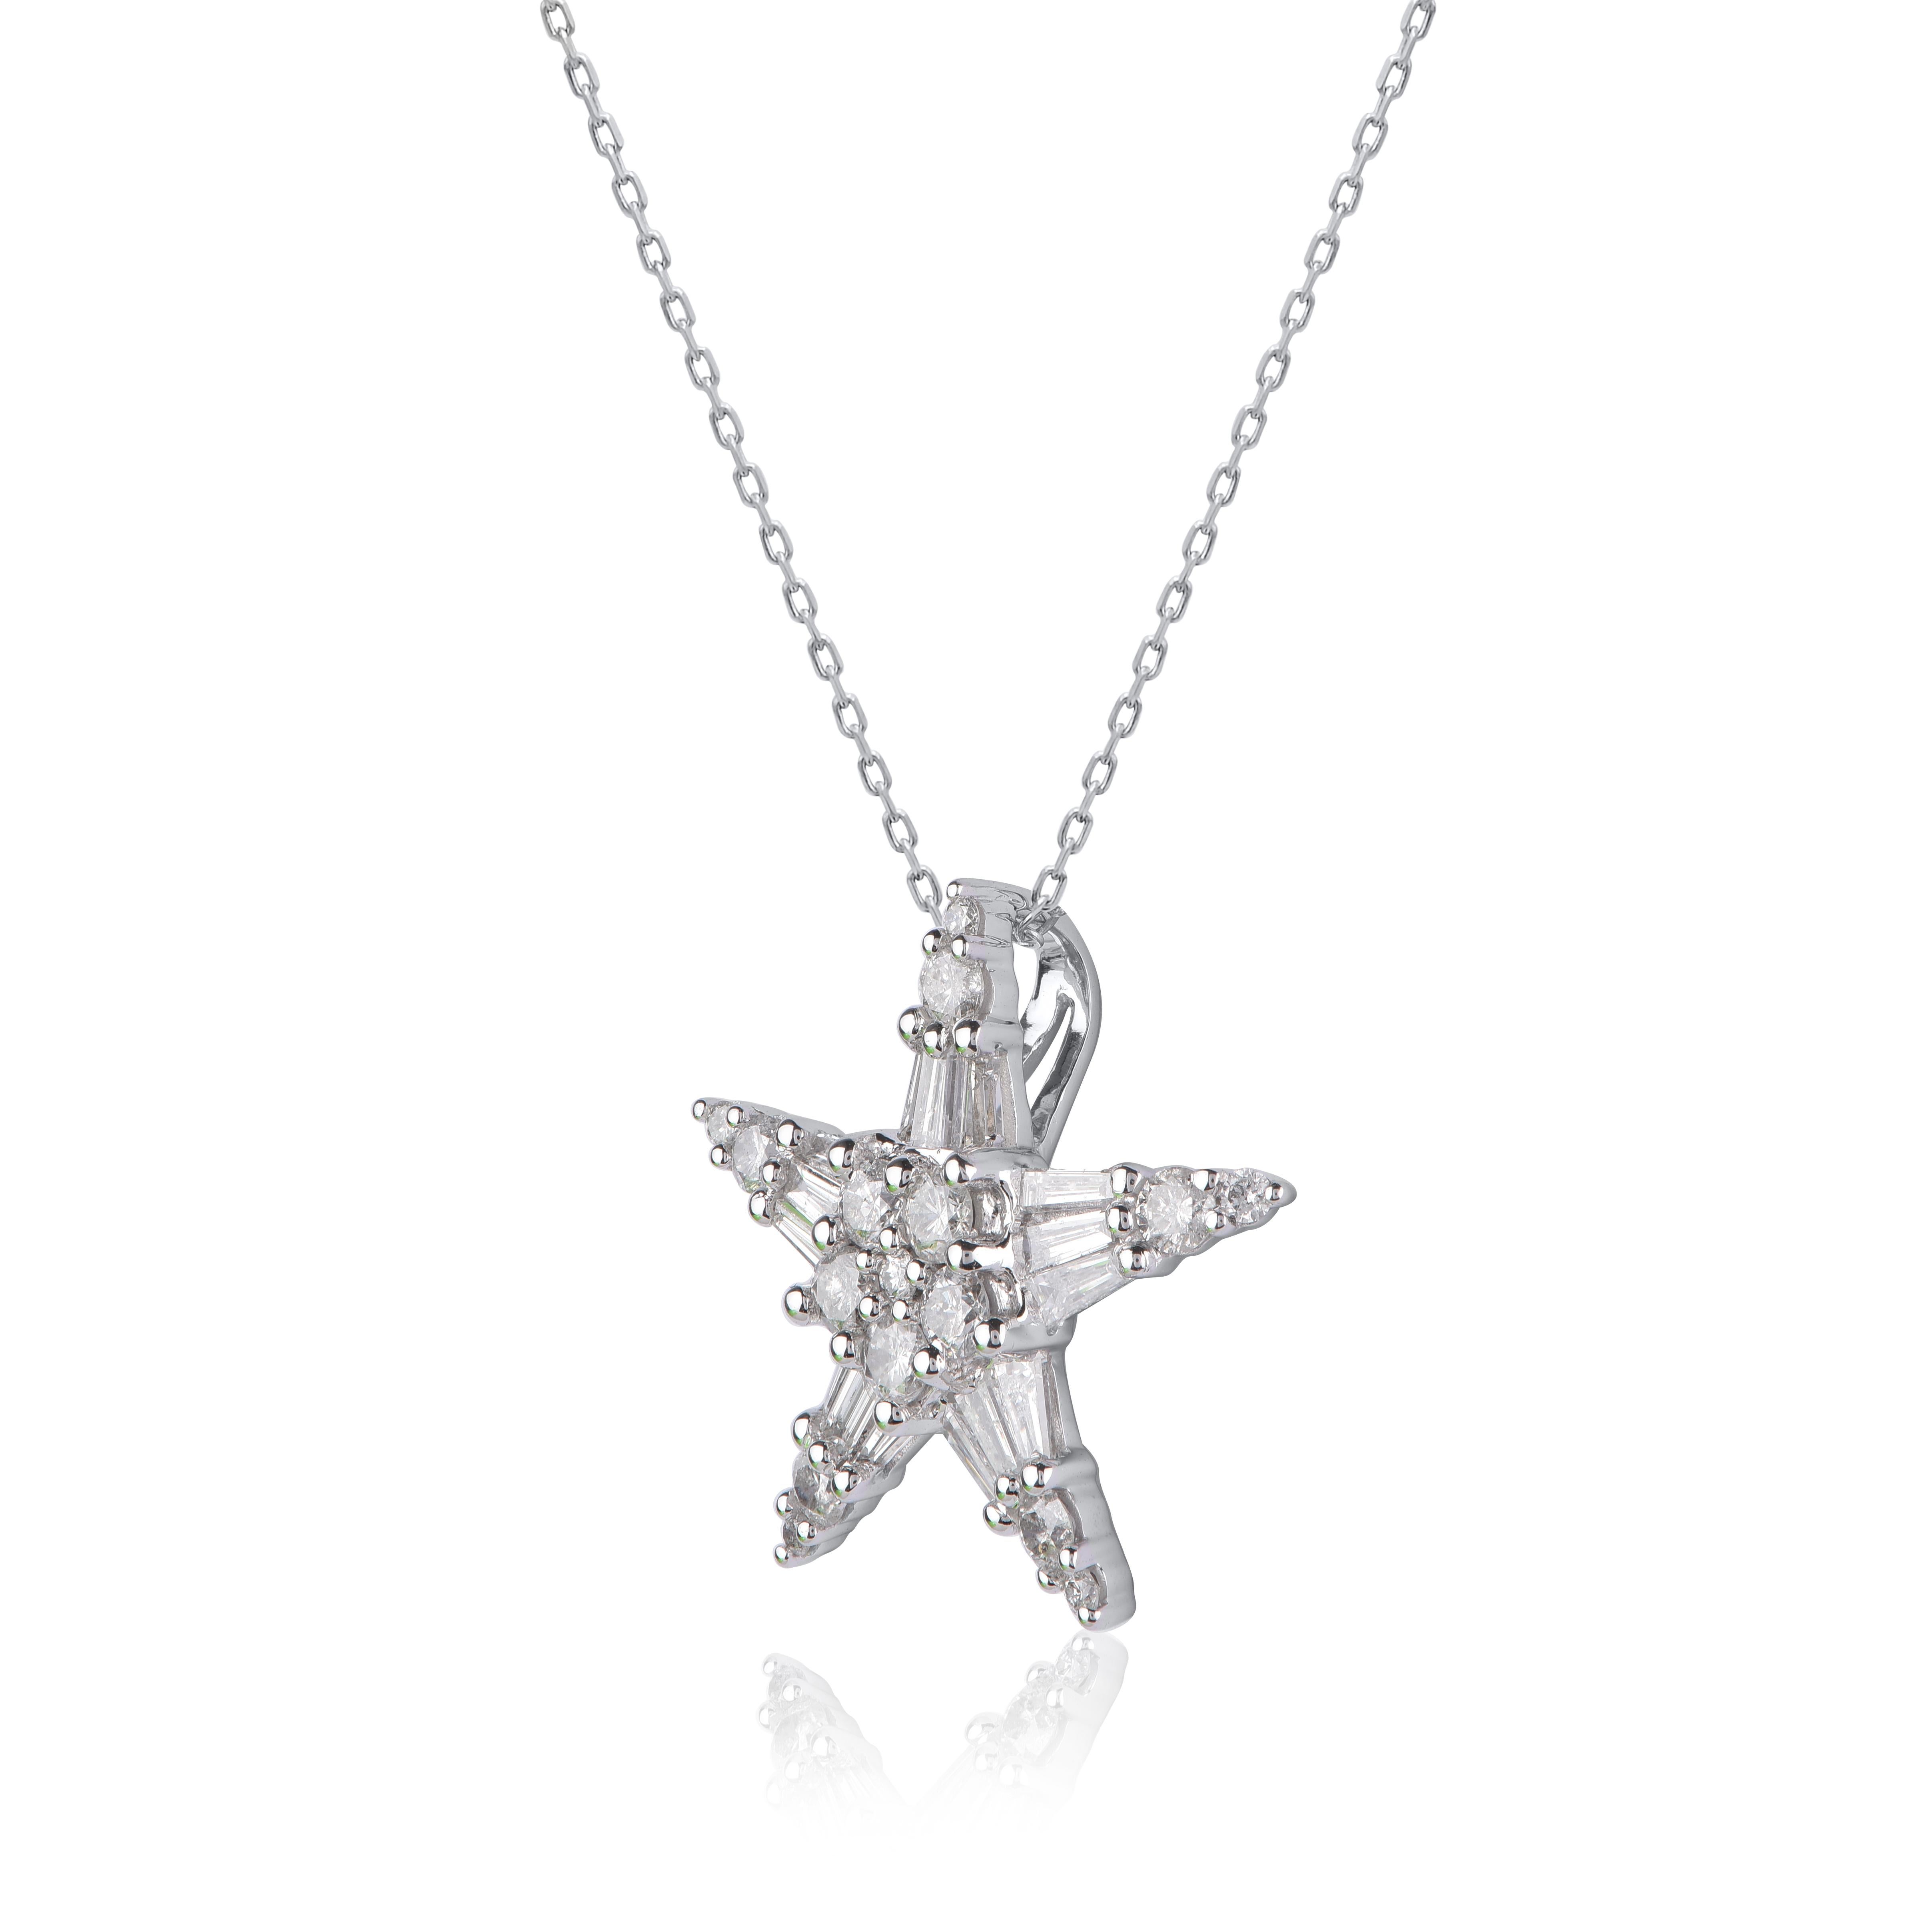 Bring the dazzle to your attire with this diamond star pendant. This star pendant is crafted from 14-karat white gold and features 31 brilliant cut and baguette diamonds set in prong setting. H-I color I2 clarity and a high polish finish complete